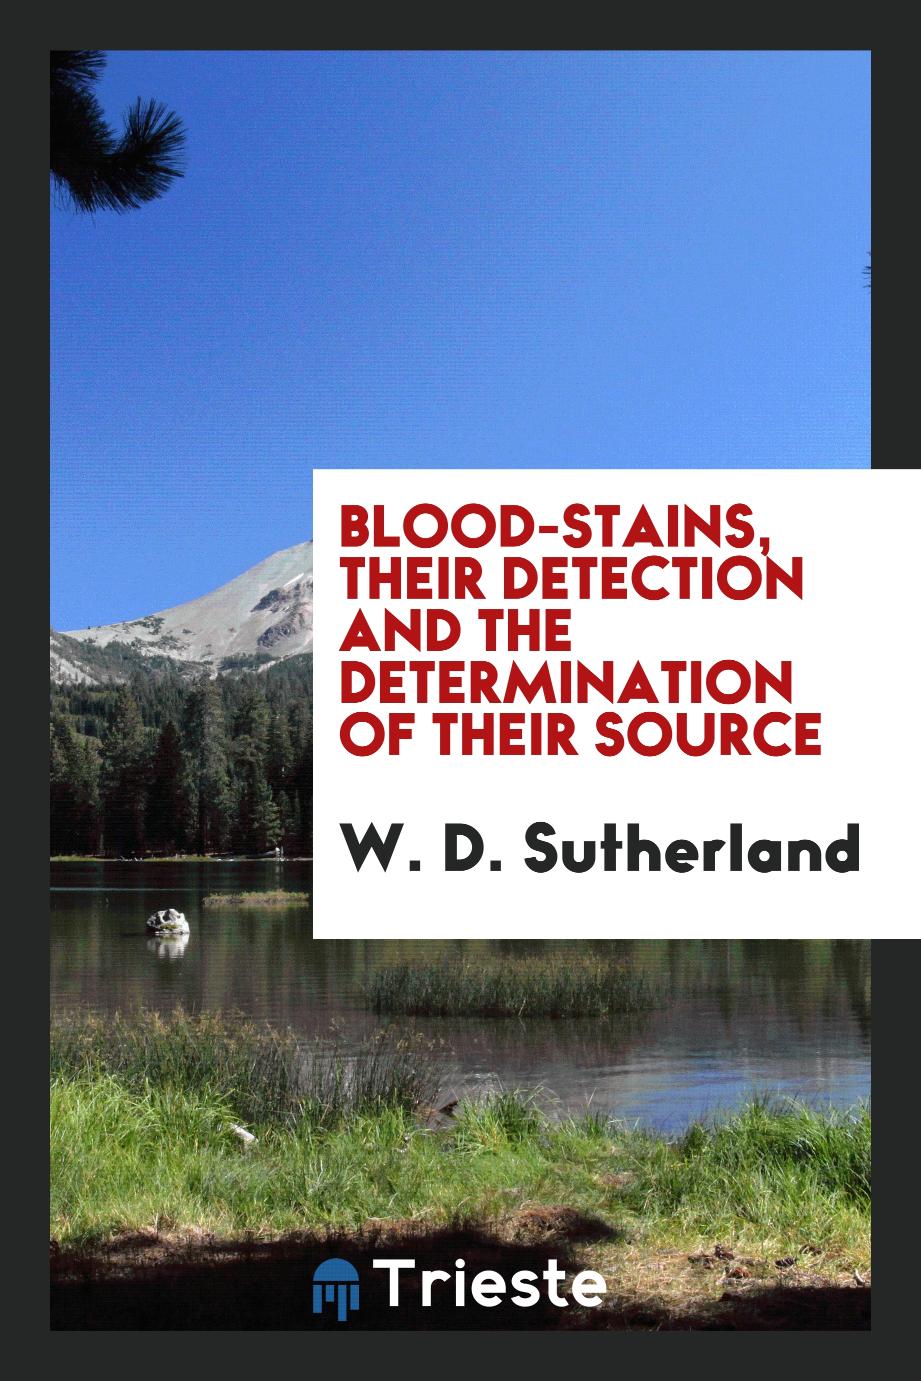 Blood-stains, their detection and the determination of their source